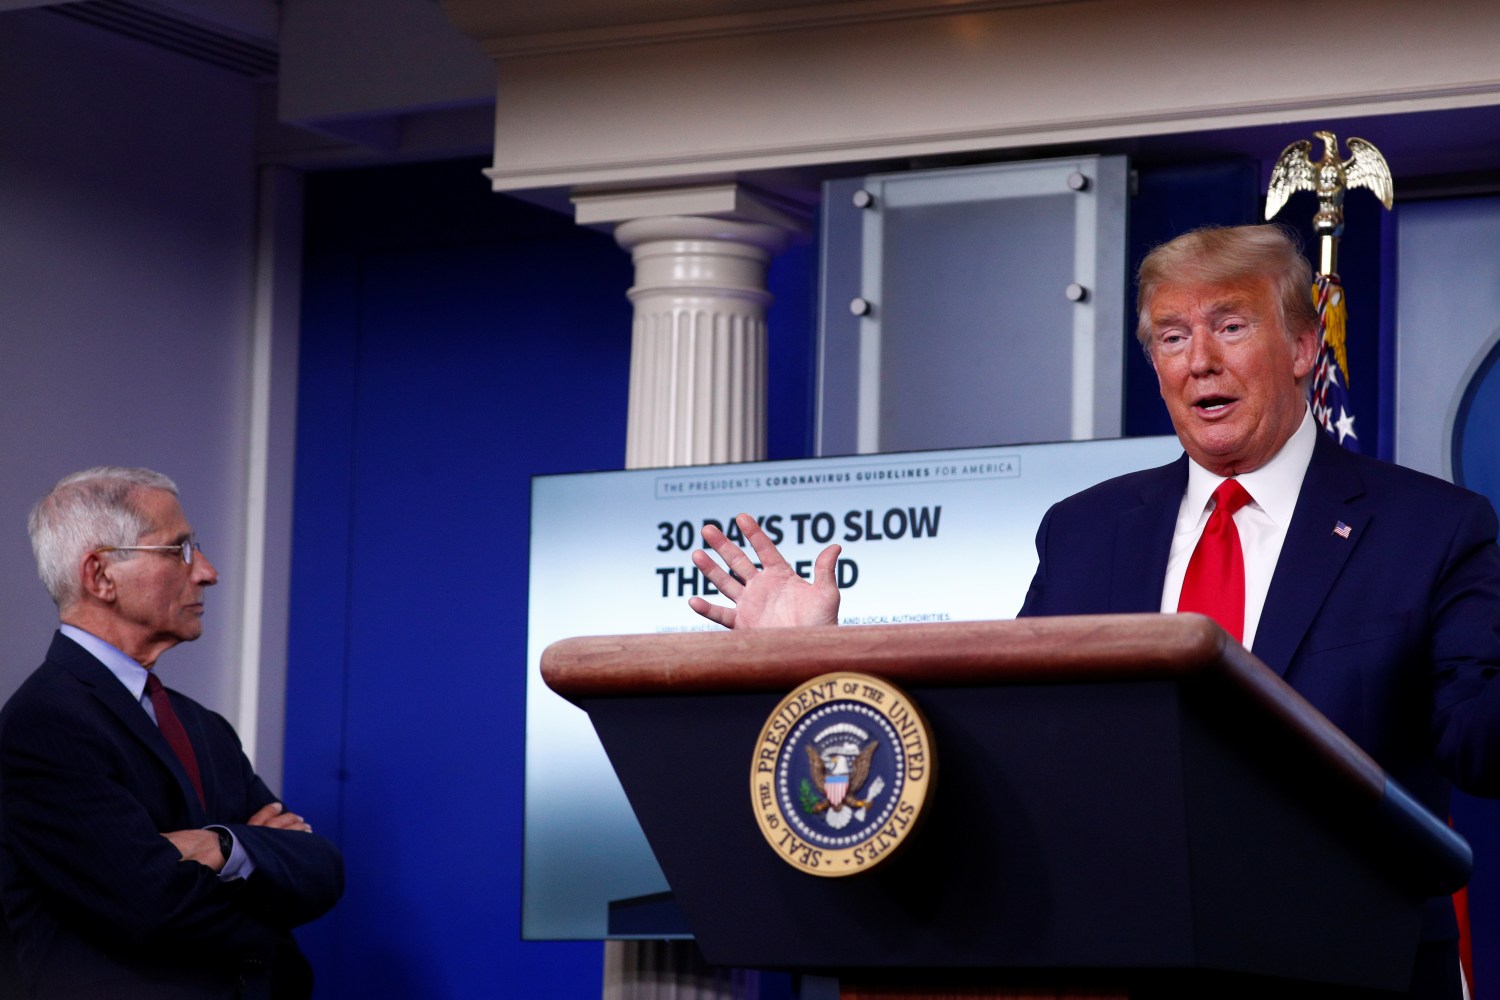 Dr. Anthony Fauci, Director of the National Institute of Allergy and Infectious Diseases, listens as U.S. President Donald Trump addressses the daily coronavirus response briefing at the White House in Washington, U.S., March 31, 2020. REUTERS/Tom Brenner?